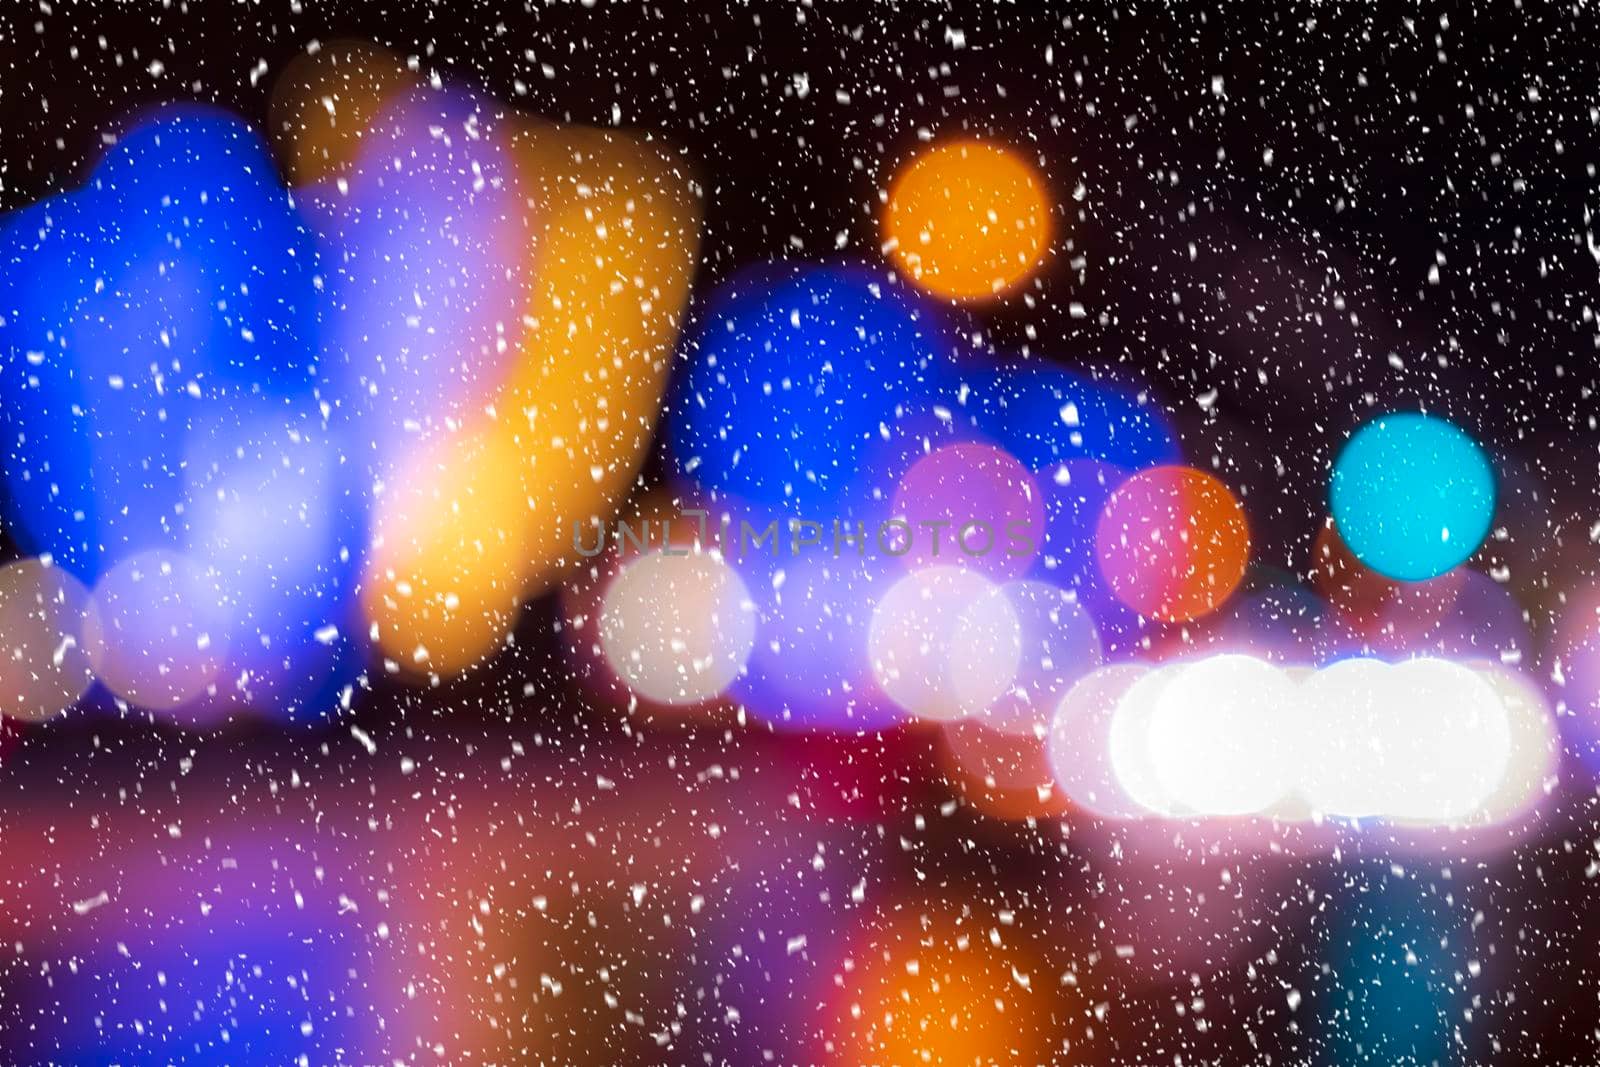 Blurred lights of headlights of cars and lanterns in the night city in a snowfall. Abstract bright bokeh.